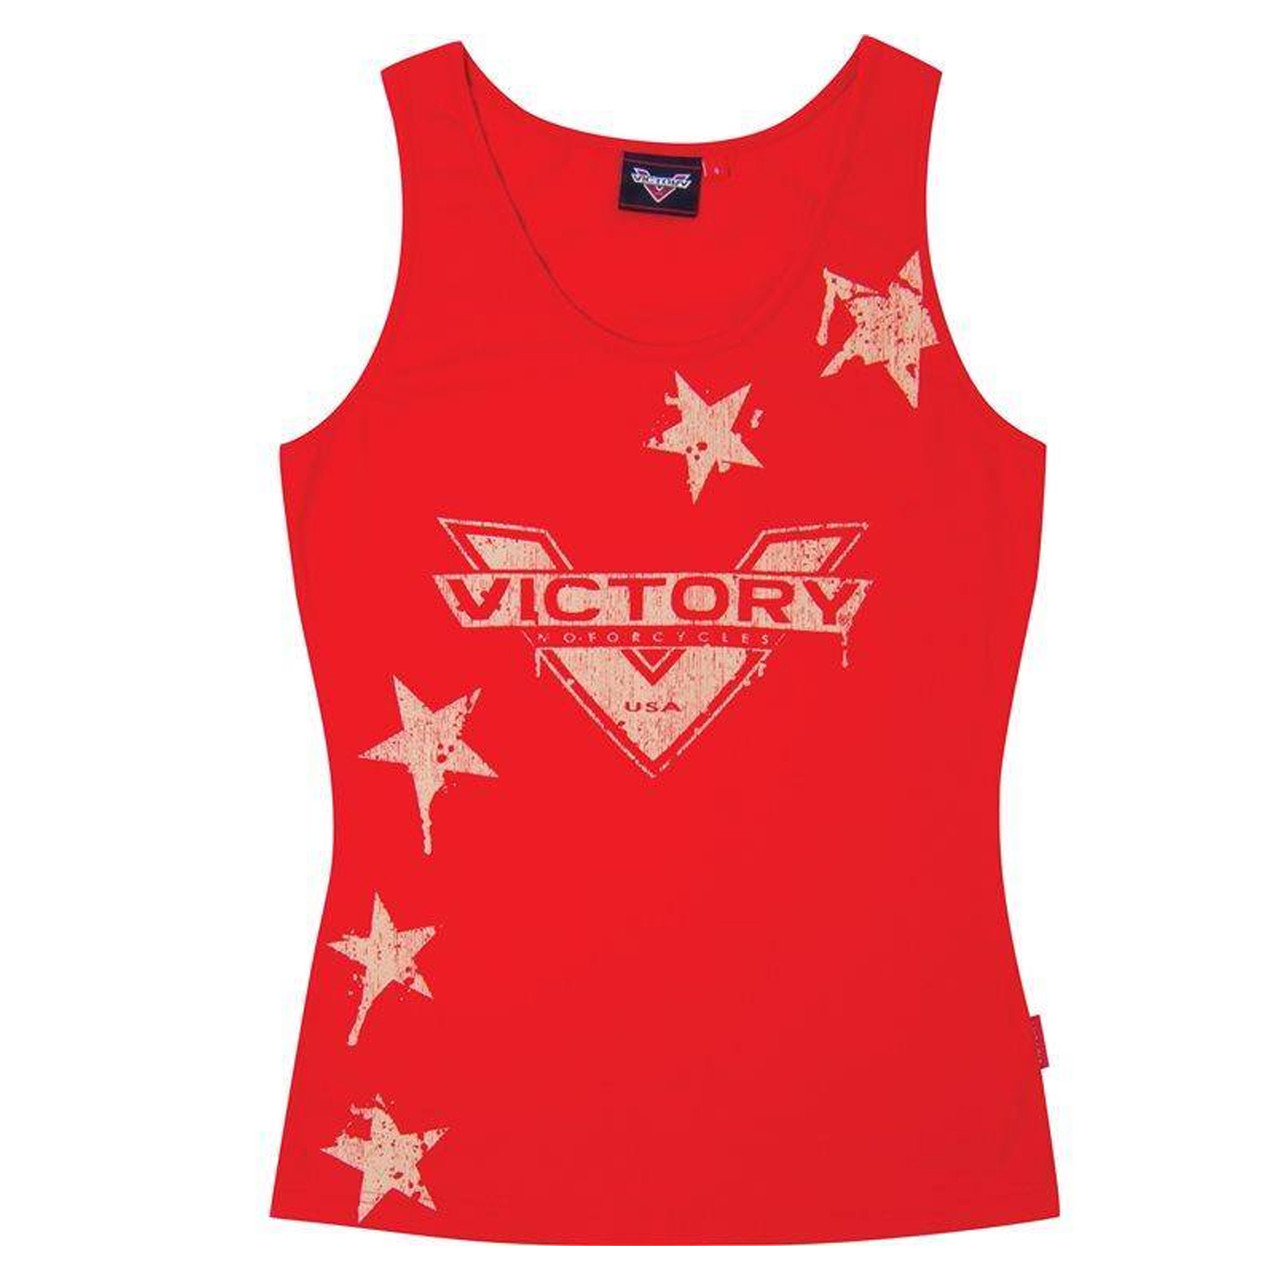 Victory Motorcycle New OEM Women's Red Star Tank Top Shirt, 2X-Large, 286435212